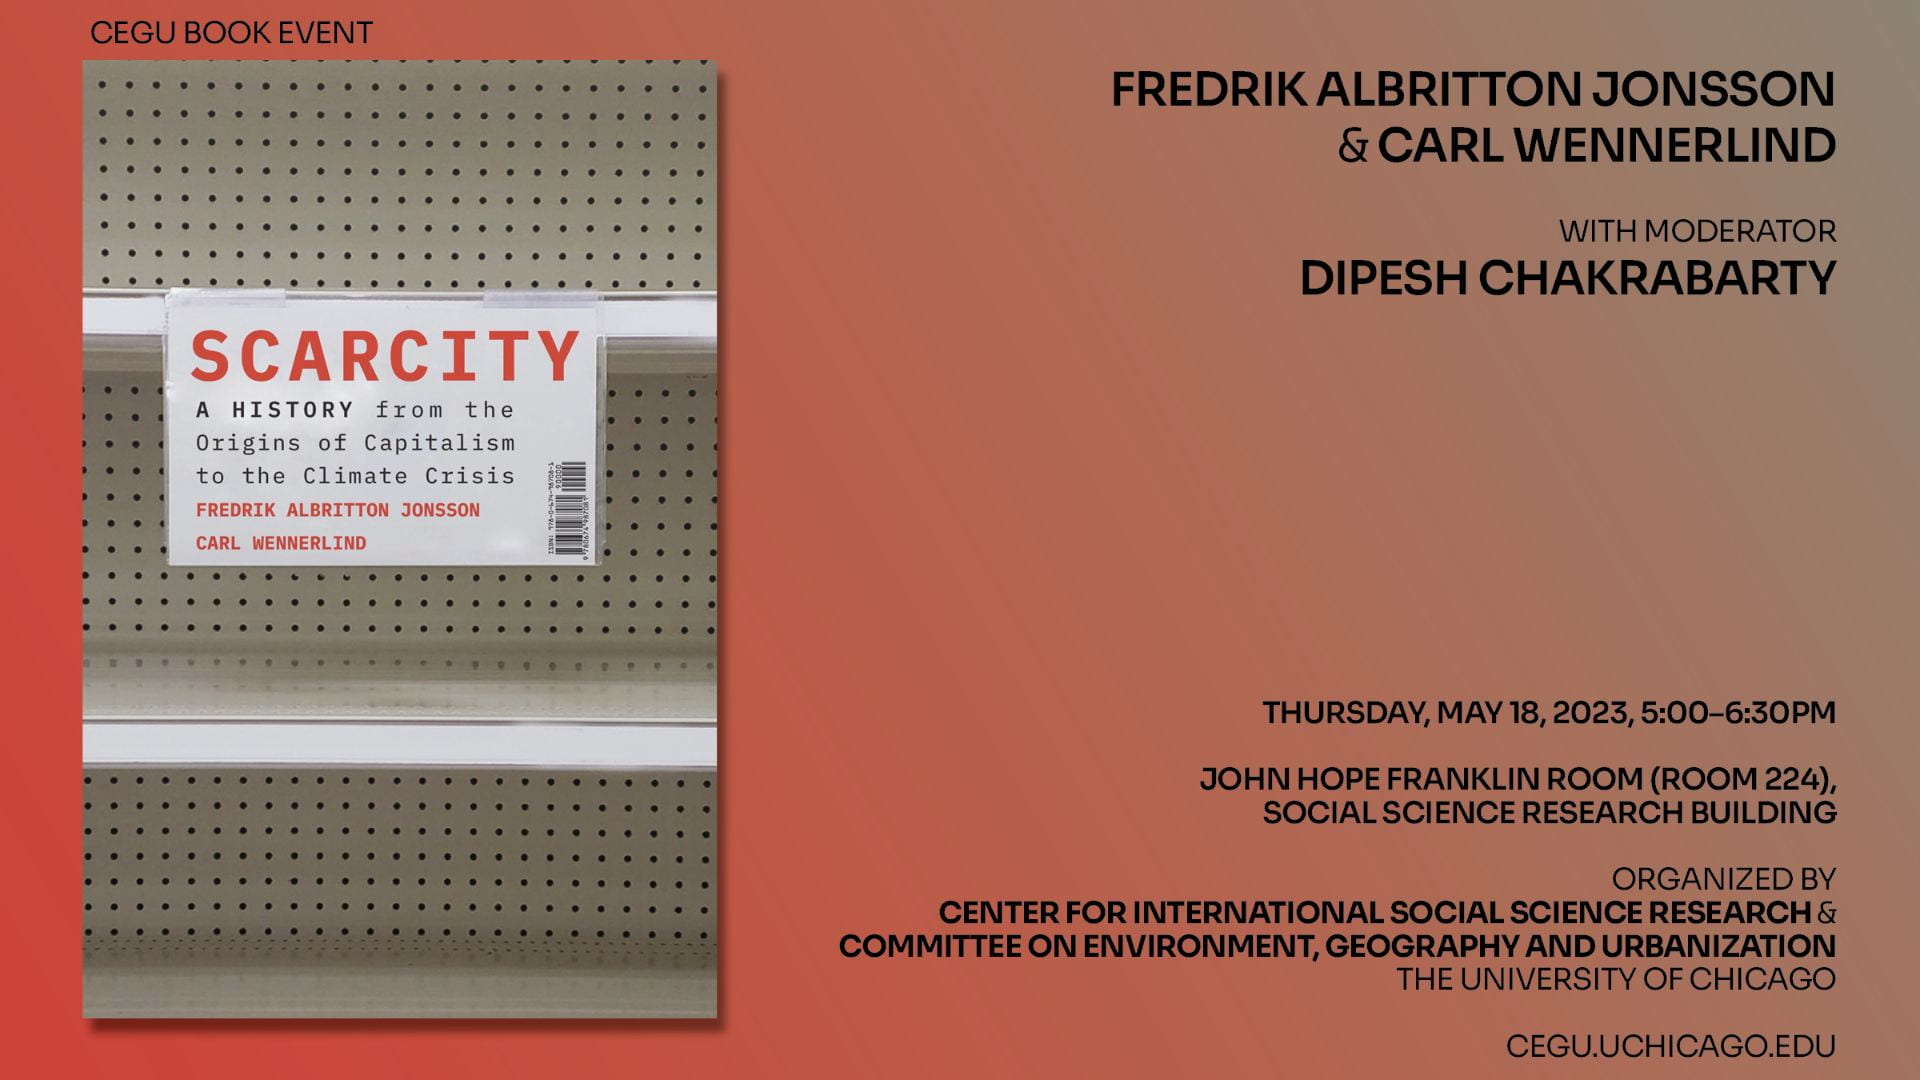 poster for Scarcity, CEGU Book talk by Fredrik Albritton Jonsson and Carl Wennerlind, May 18, 2023